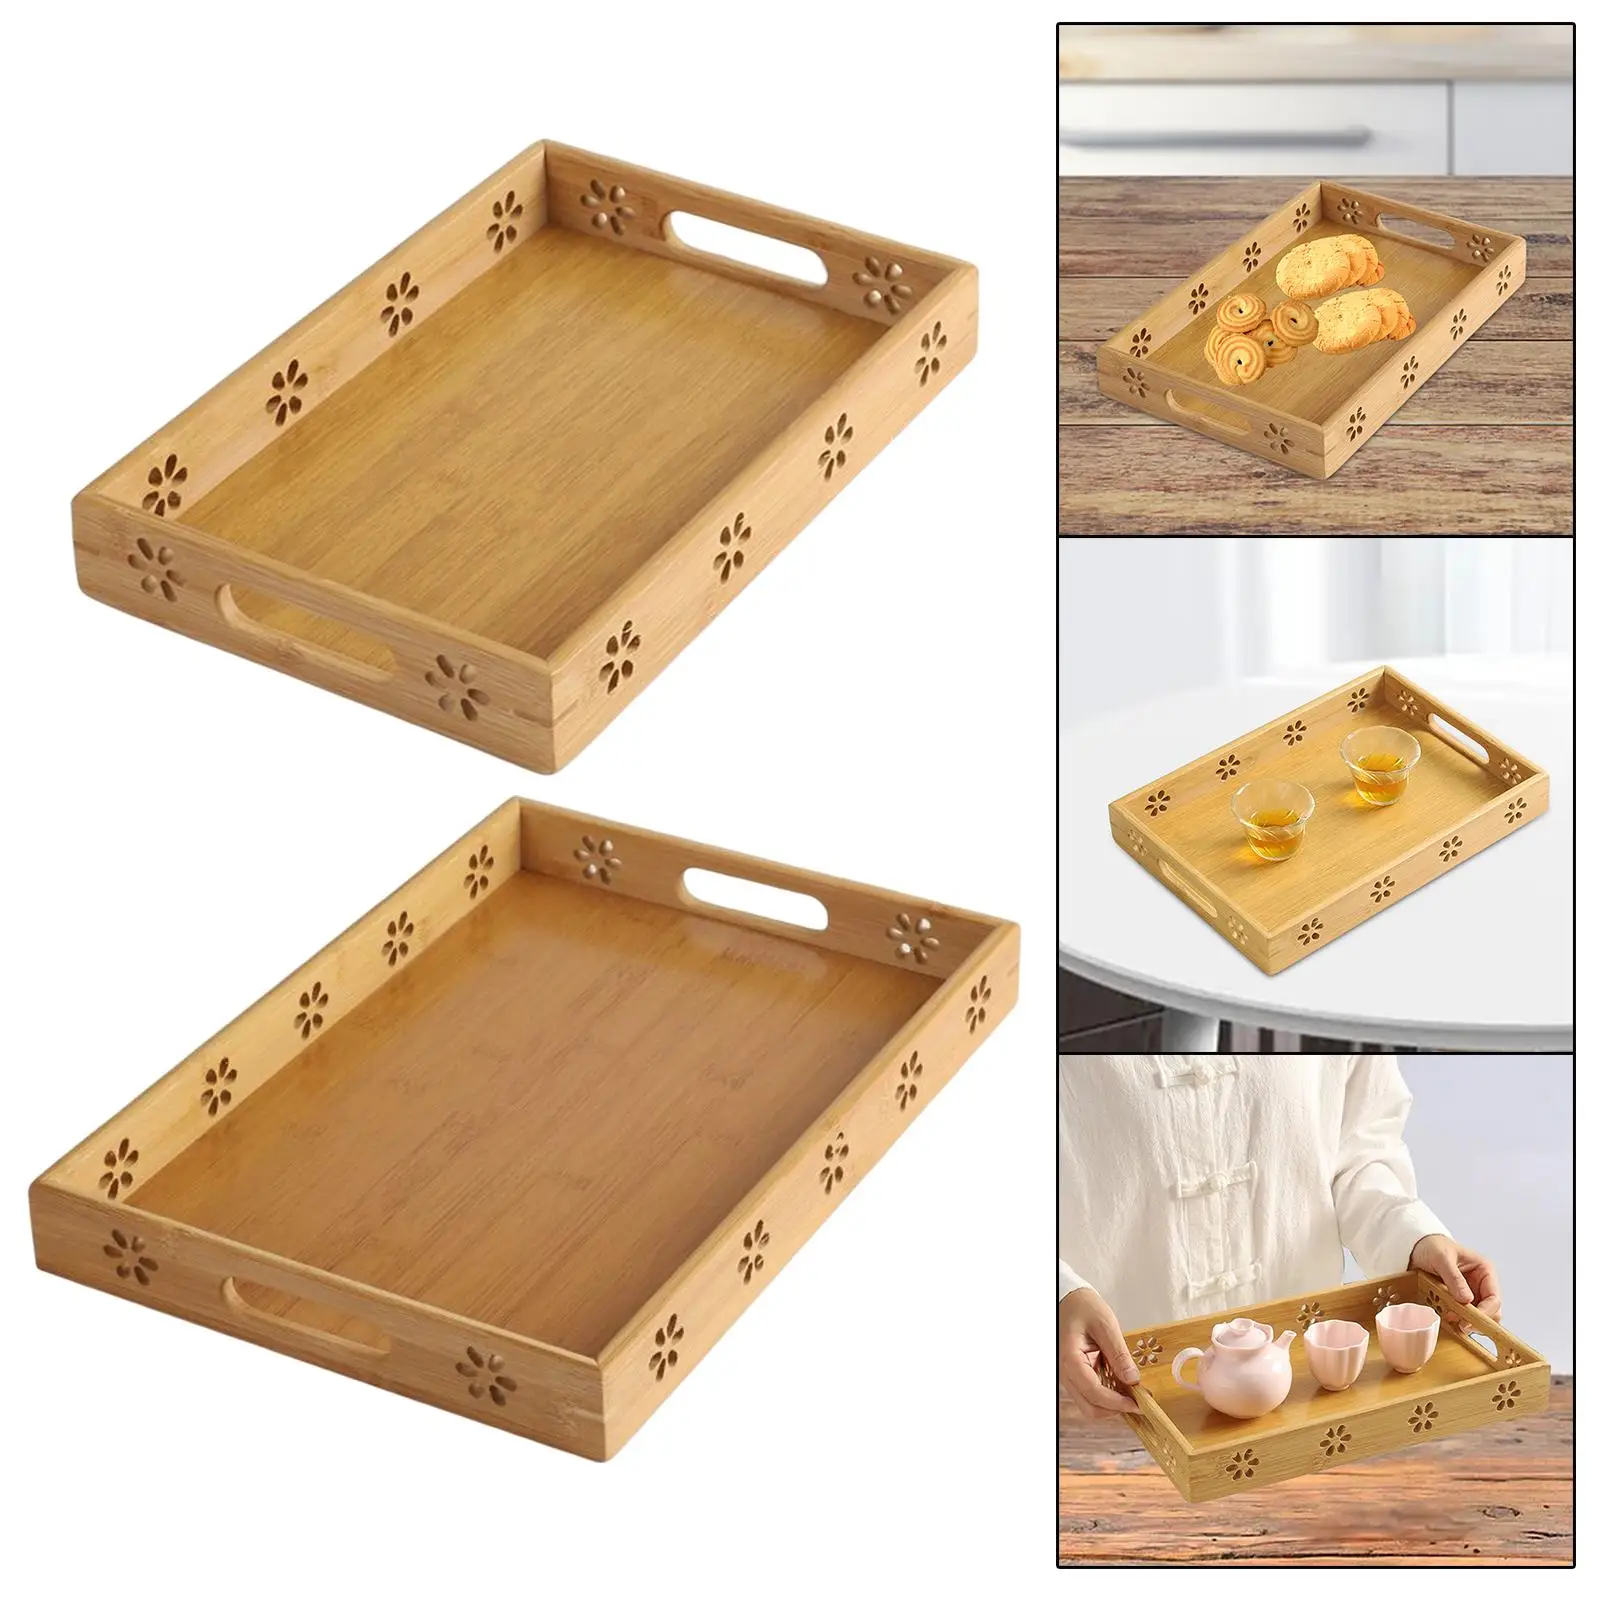 Bamboo Serving Tray Rectangular Tray for Kitchen Breakfast Hotel Home Decor Table